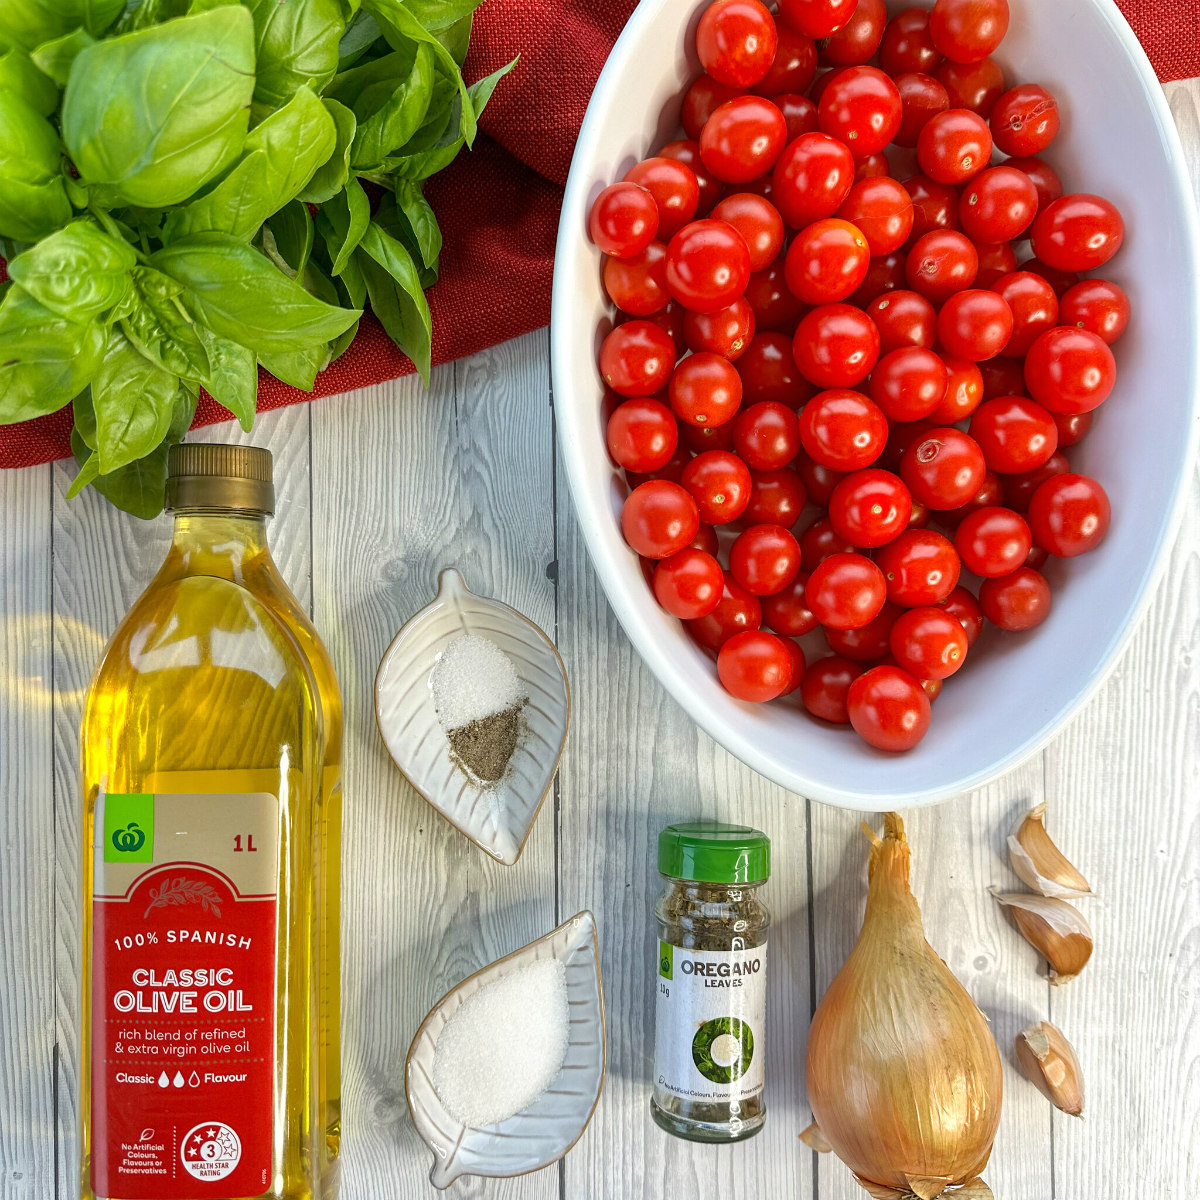 Ingredients used for slow cooker cherry tomato and basil pasta sauce 